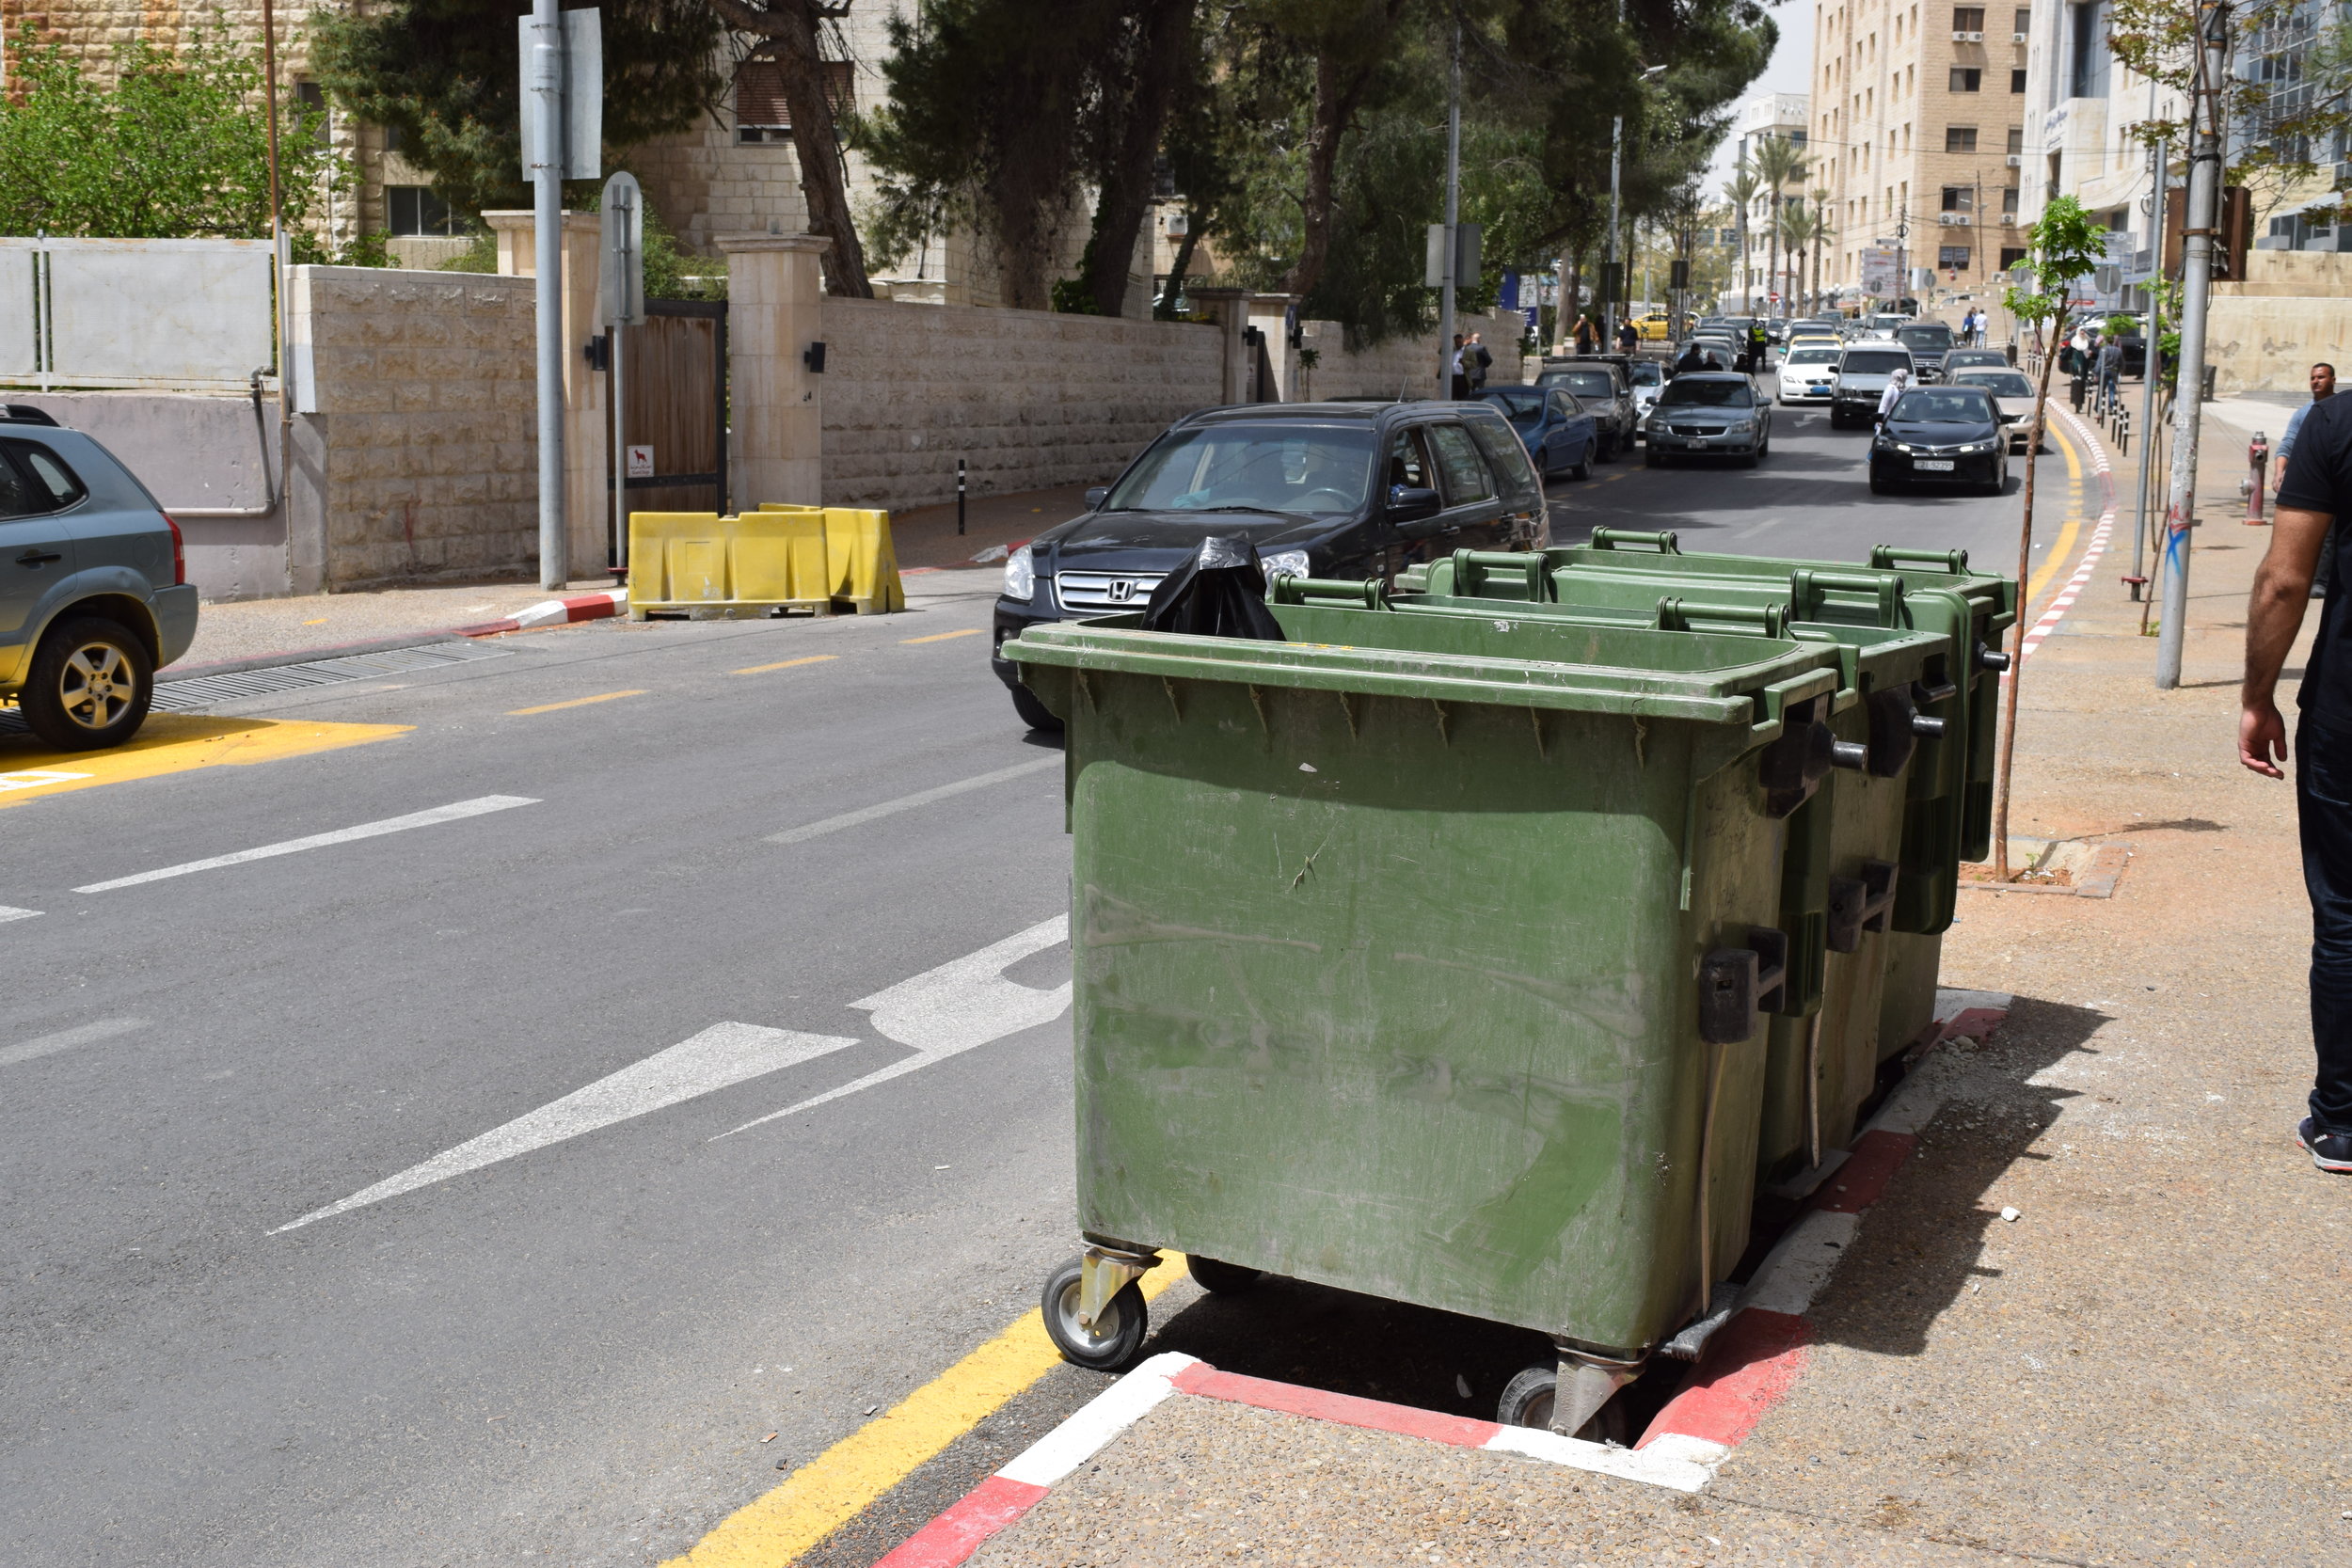  An image showing a designated area for dumpsters. 